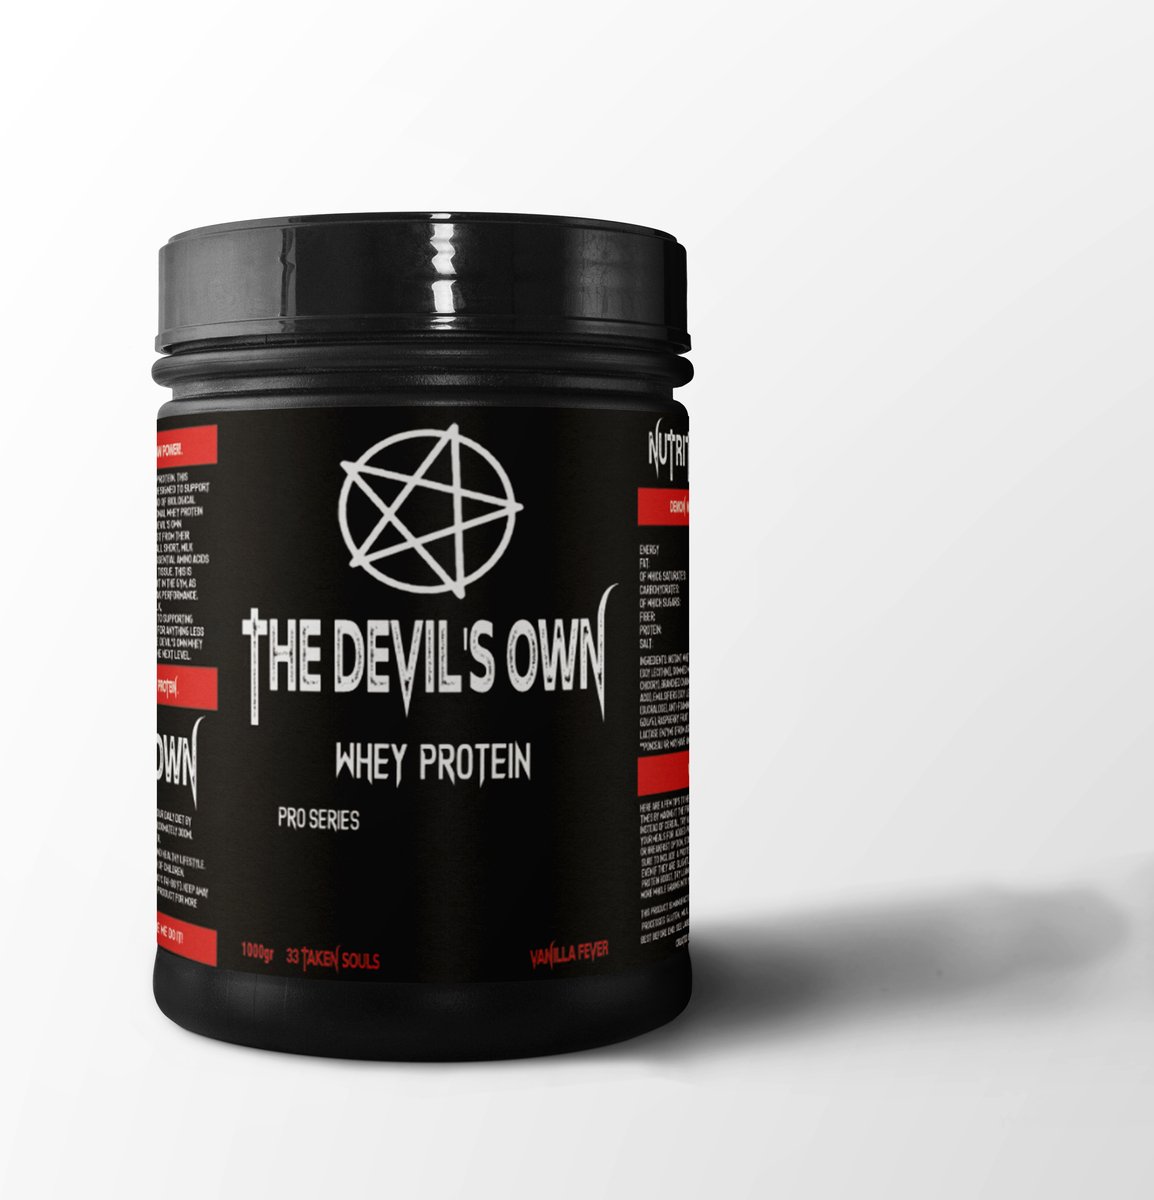 The Devil's Own | Whey protein | Vanilla | 1kg 33 servings | Eiwitshake | Proteïne shake | Eiwitten | Proteïne | Supplement | Concentraat | Nutriworld